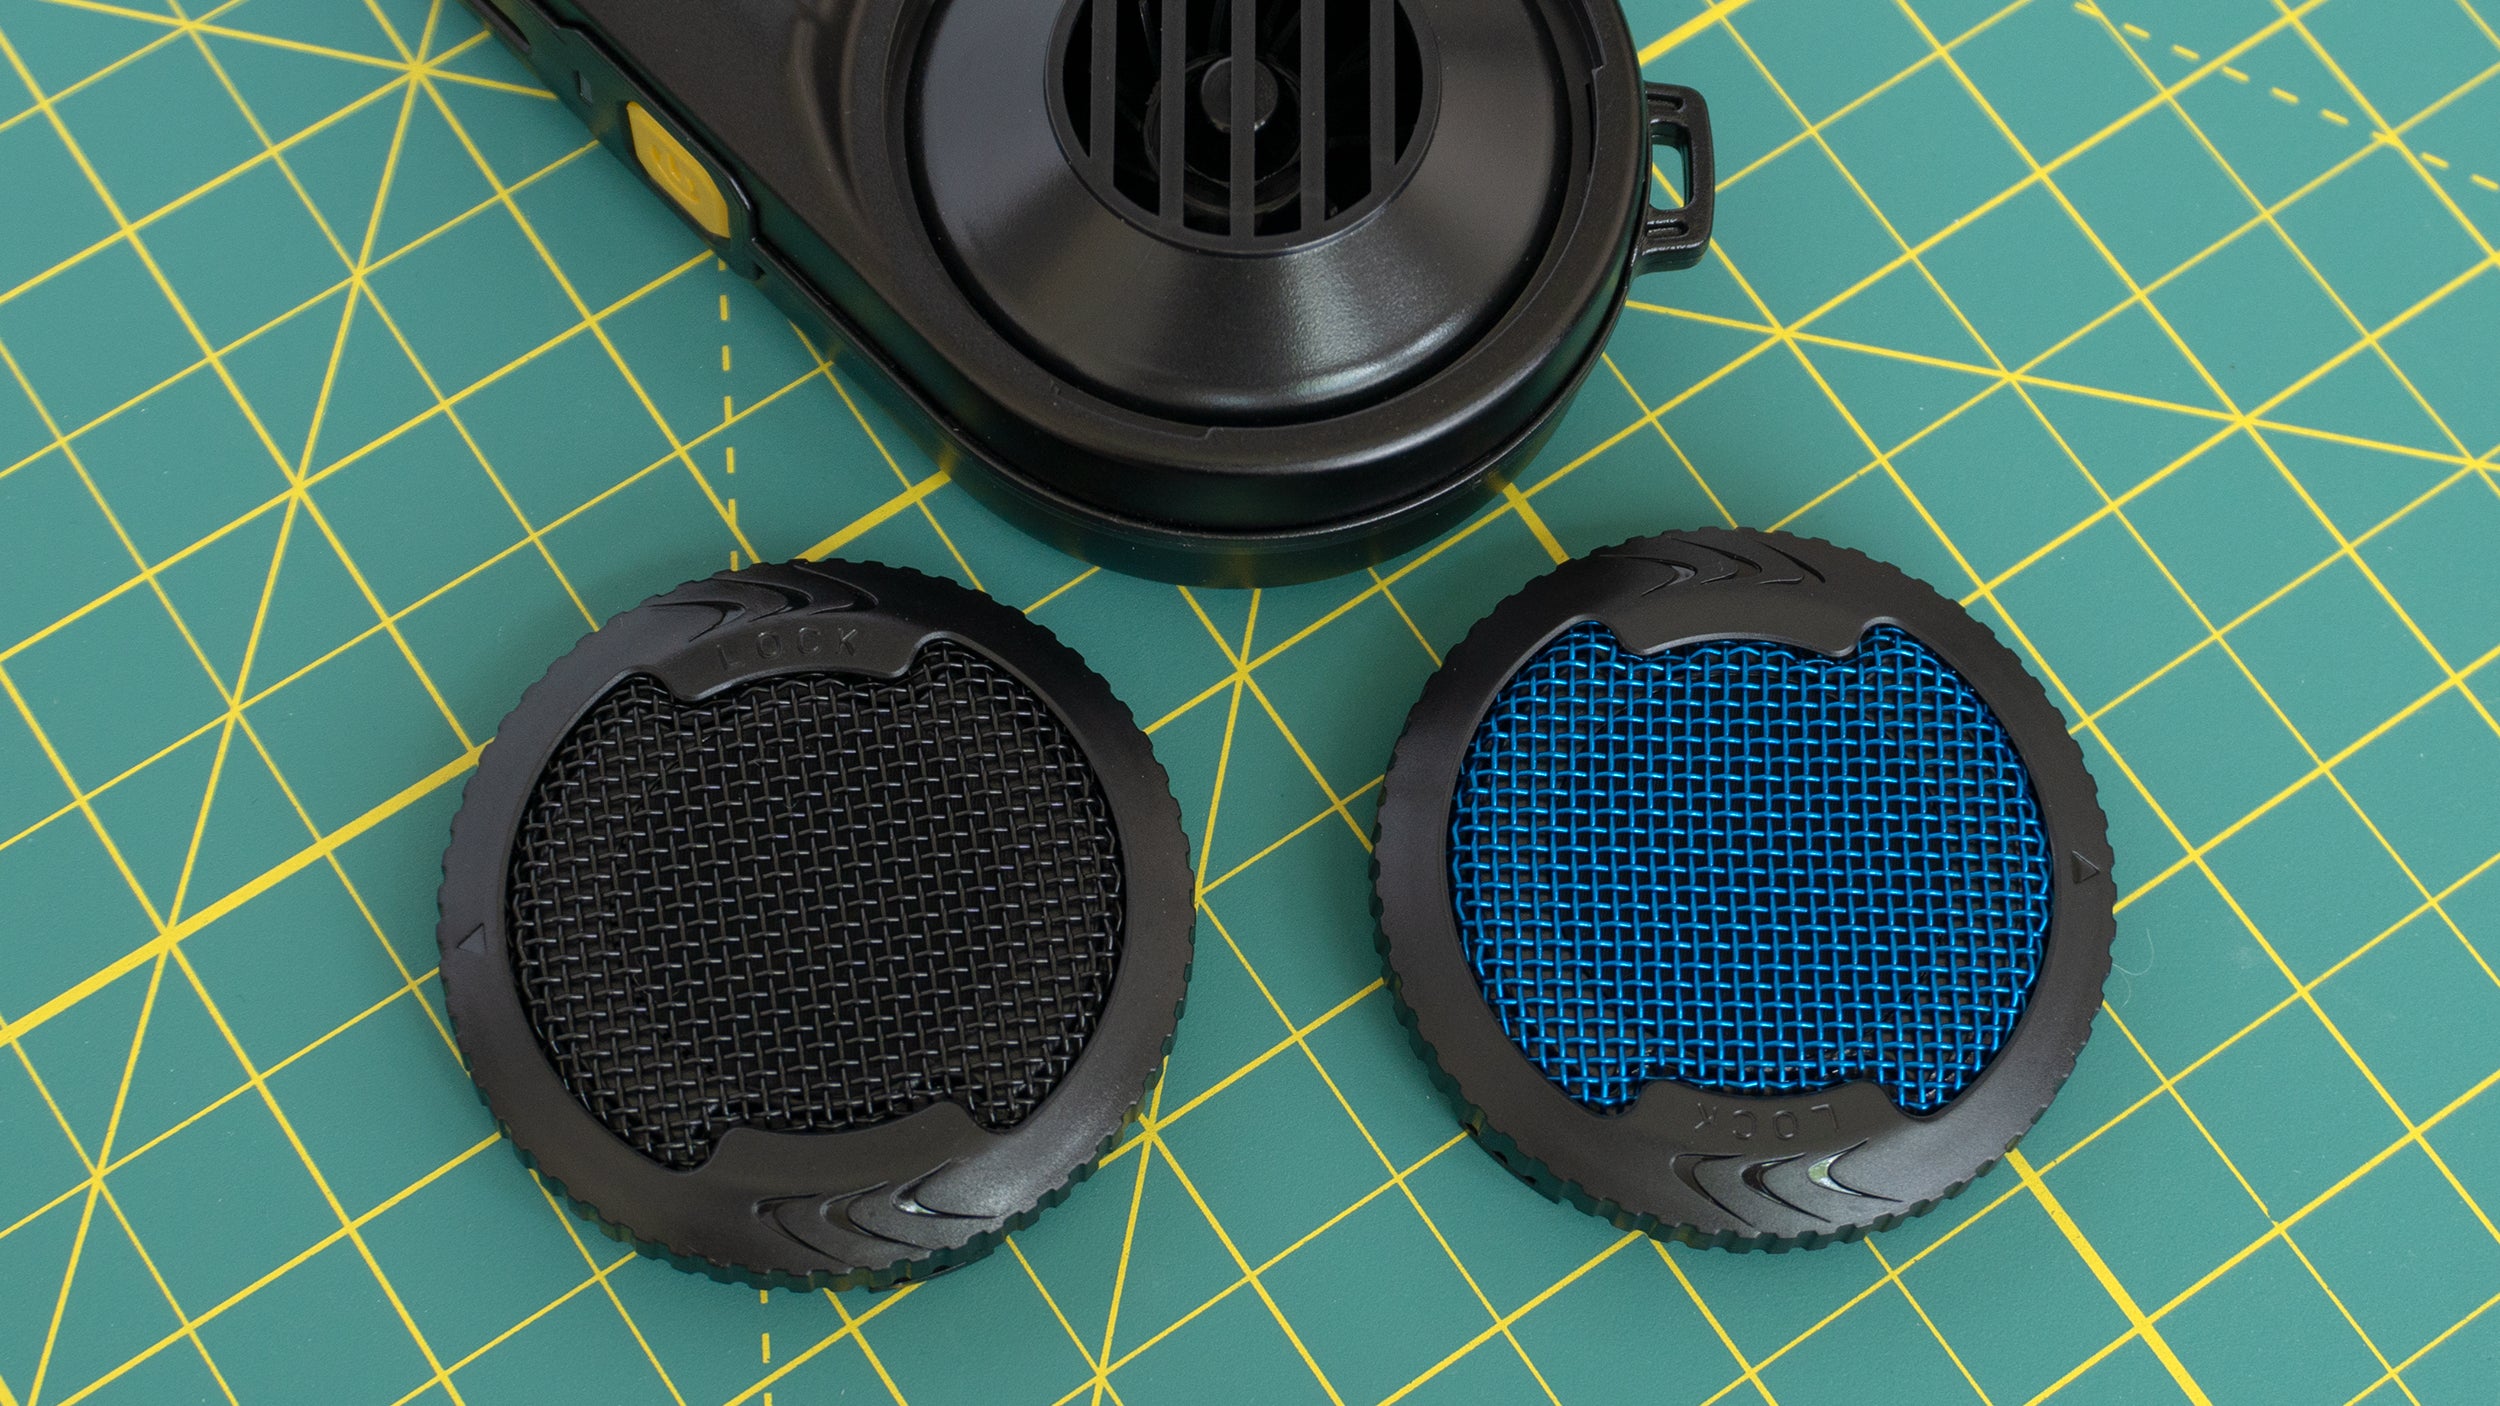 An alternate CMOS Air Filter (the blue version) can be swapped in to filter out even finer particles and reduce the power of the BlowerBaby so it can be safely used to clean camera sensors. (Image: Andrew Liszewski | Gizmodo)